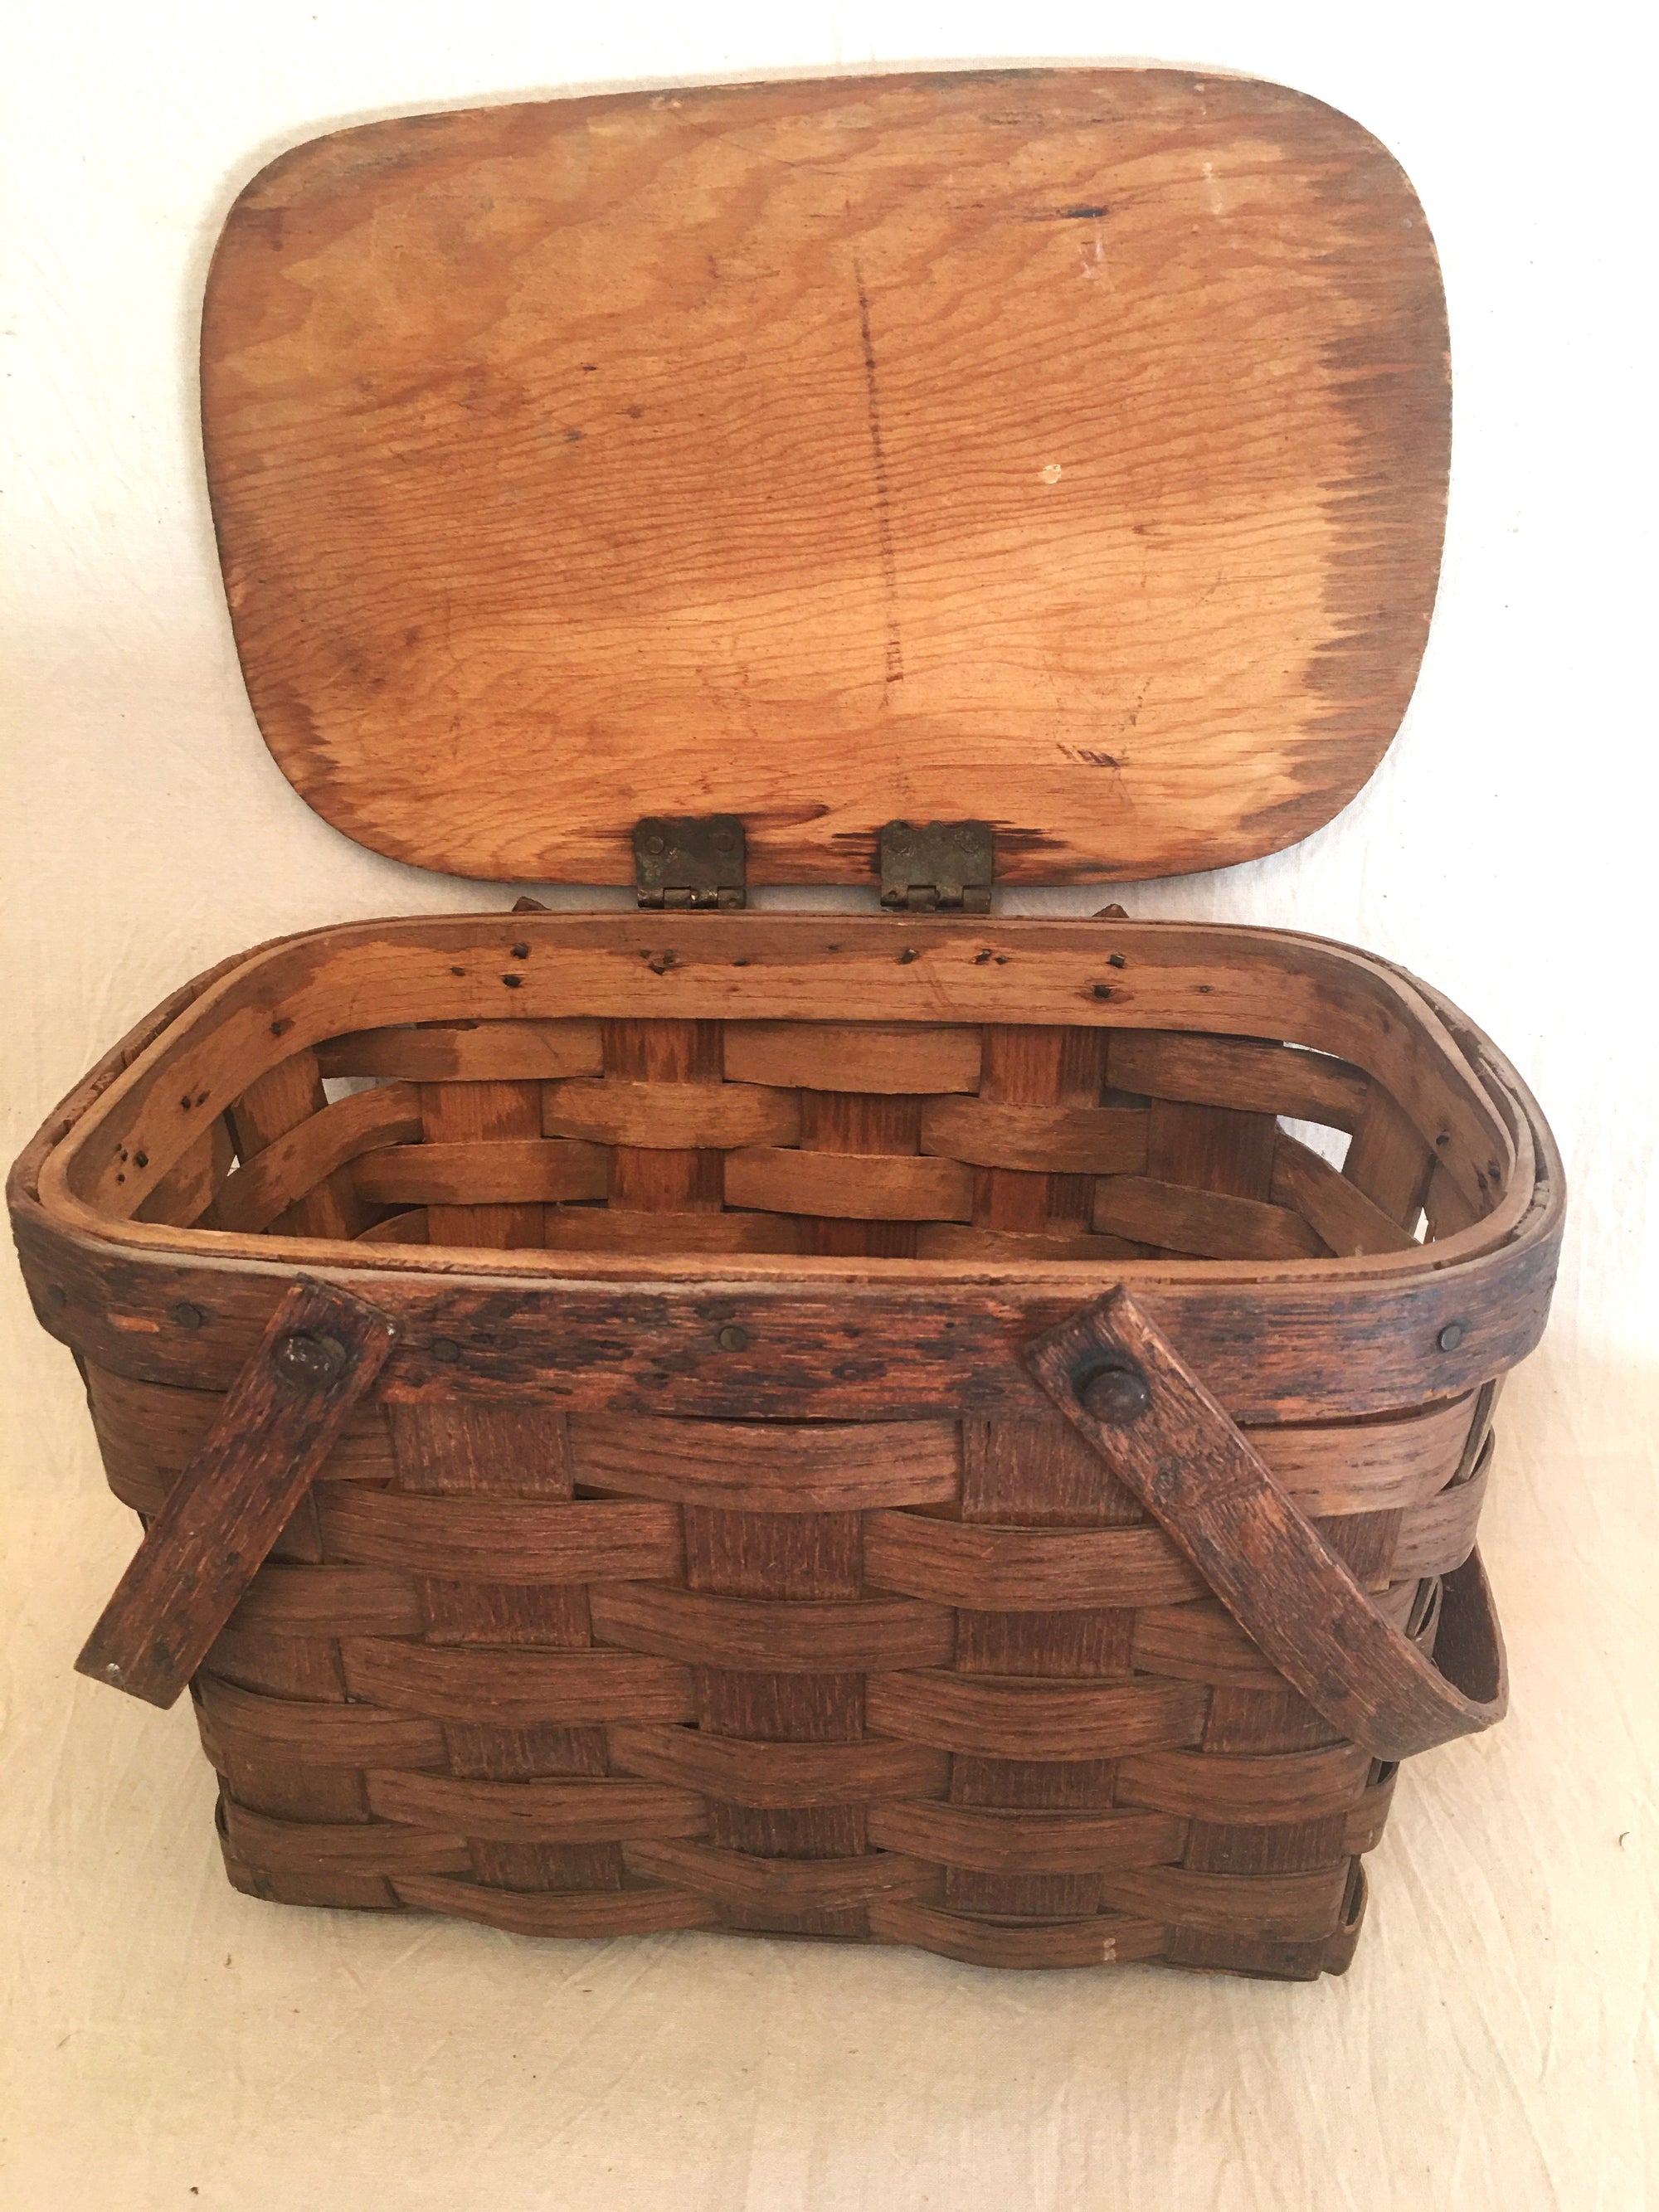 Early 1900’s Child’s Picnic Basket/Lunch Basket (Small)